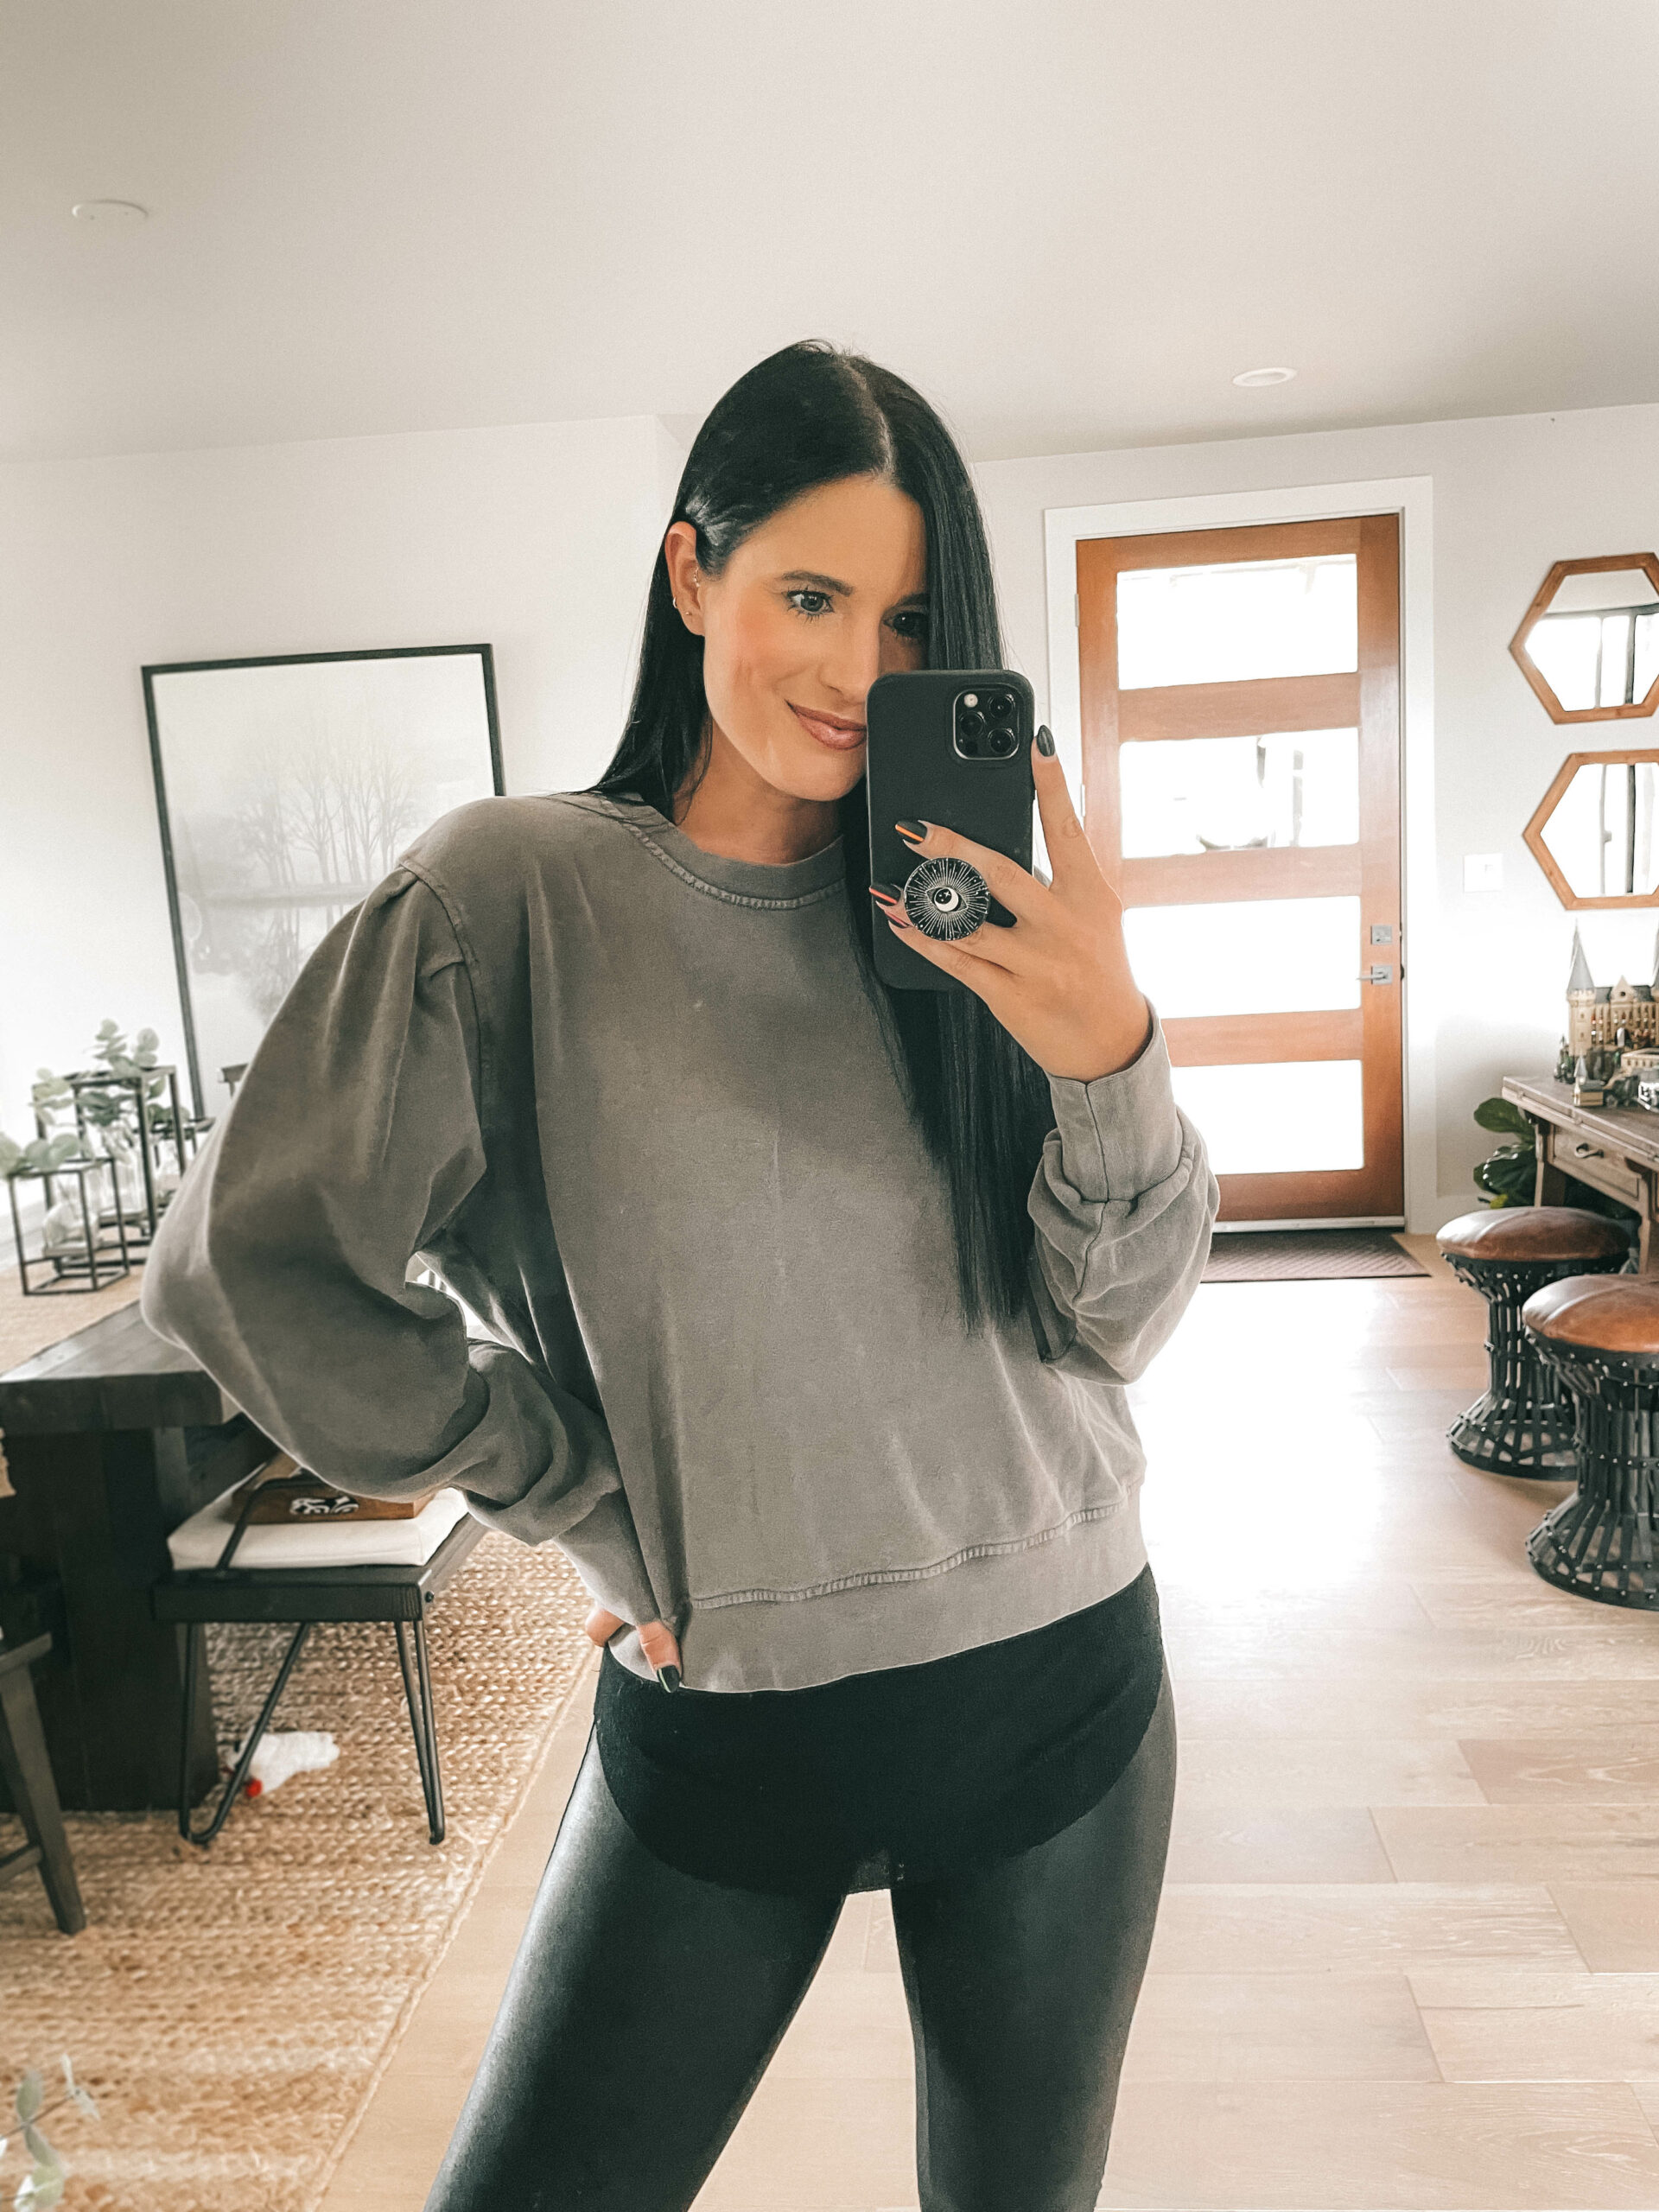 Nordstrom Anniversary Sale by popular Austin fashion blog, Dressed to Kill: image of a woman wearing a grey sweatshirt, black shirt, and black faux leather leggings. 